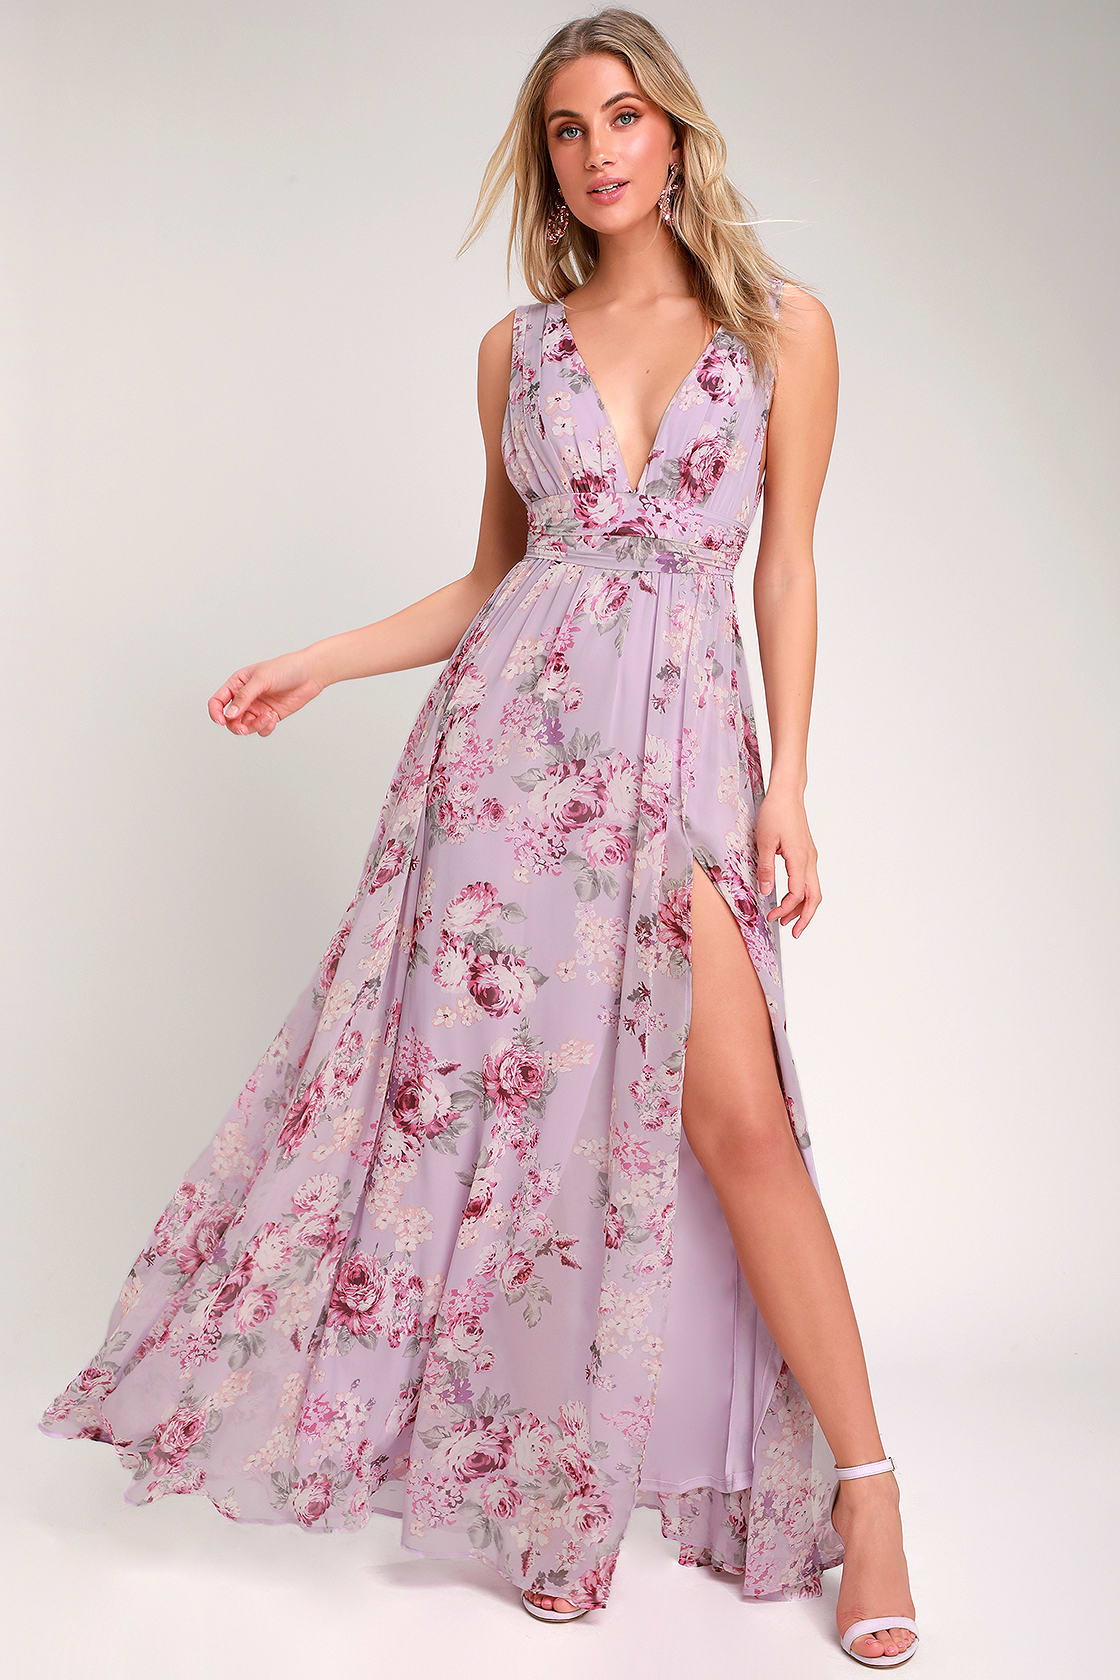 Floral Purple Maxi Dress for Wedding Guest to Wear to Wedding in Hawaii